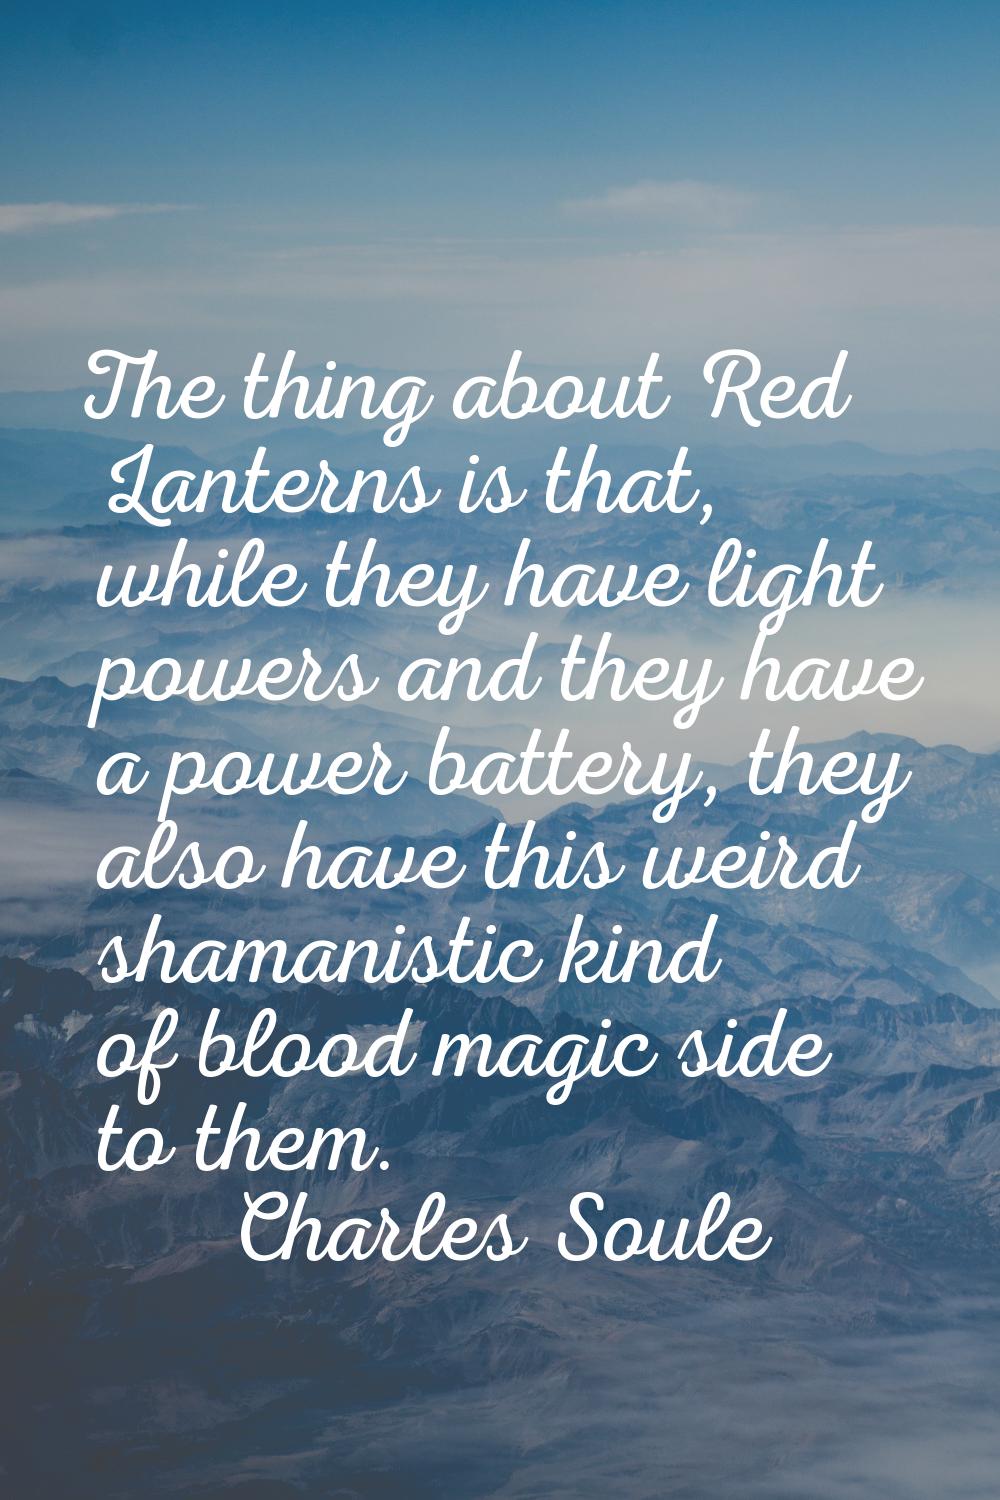 The thing about Red Lanterns is that, while they have light powers and they have a power battery, t